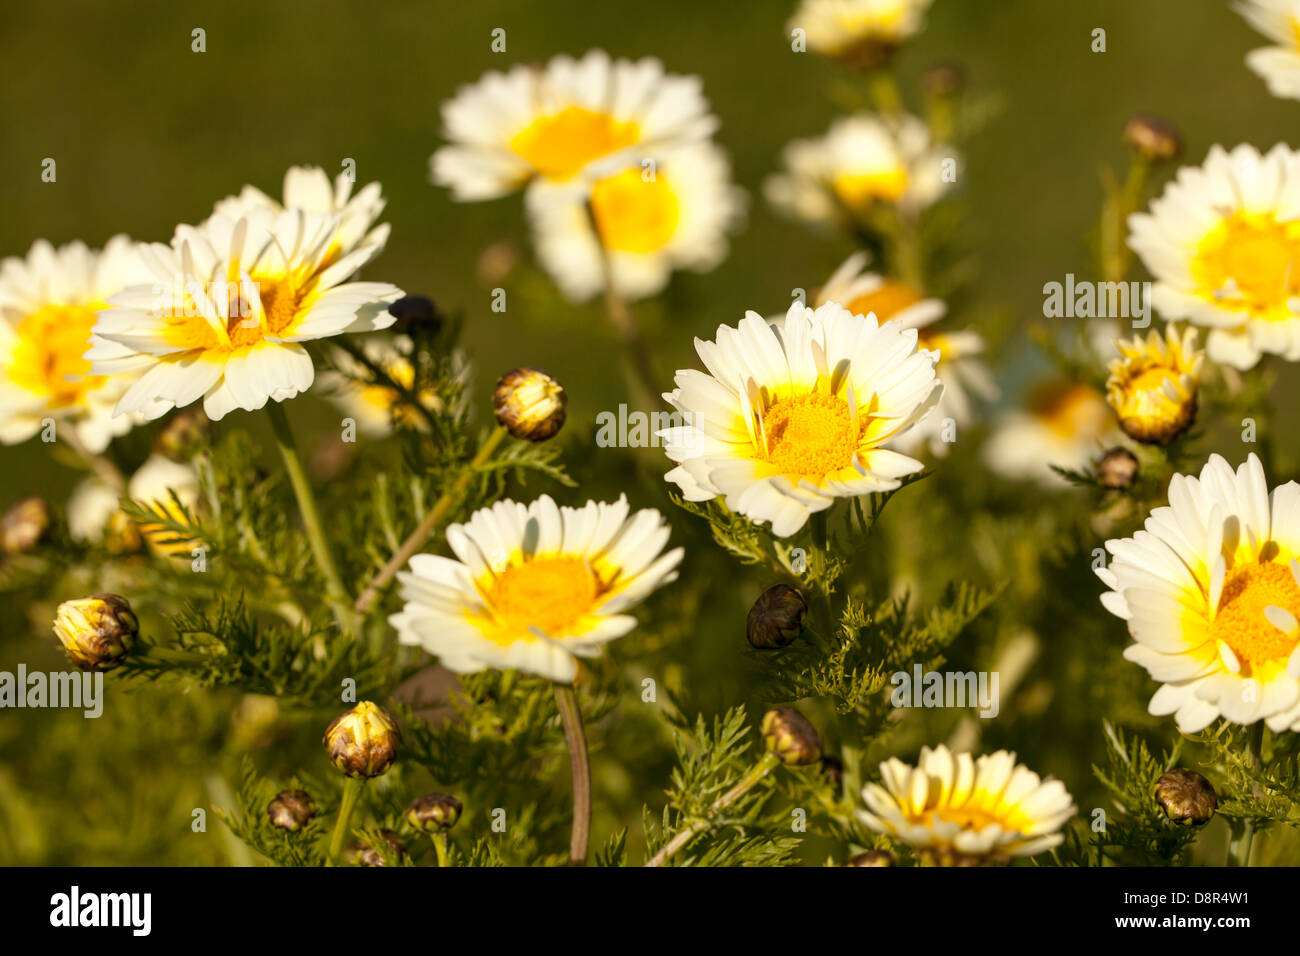 Yellow anthemis flowers in the spring garden Stock Photo